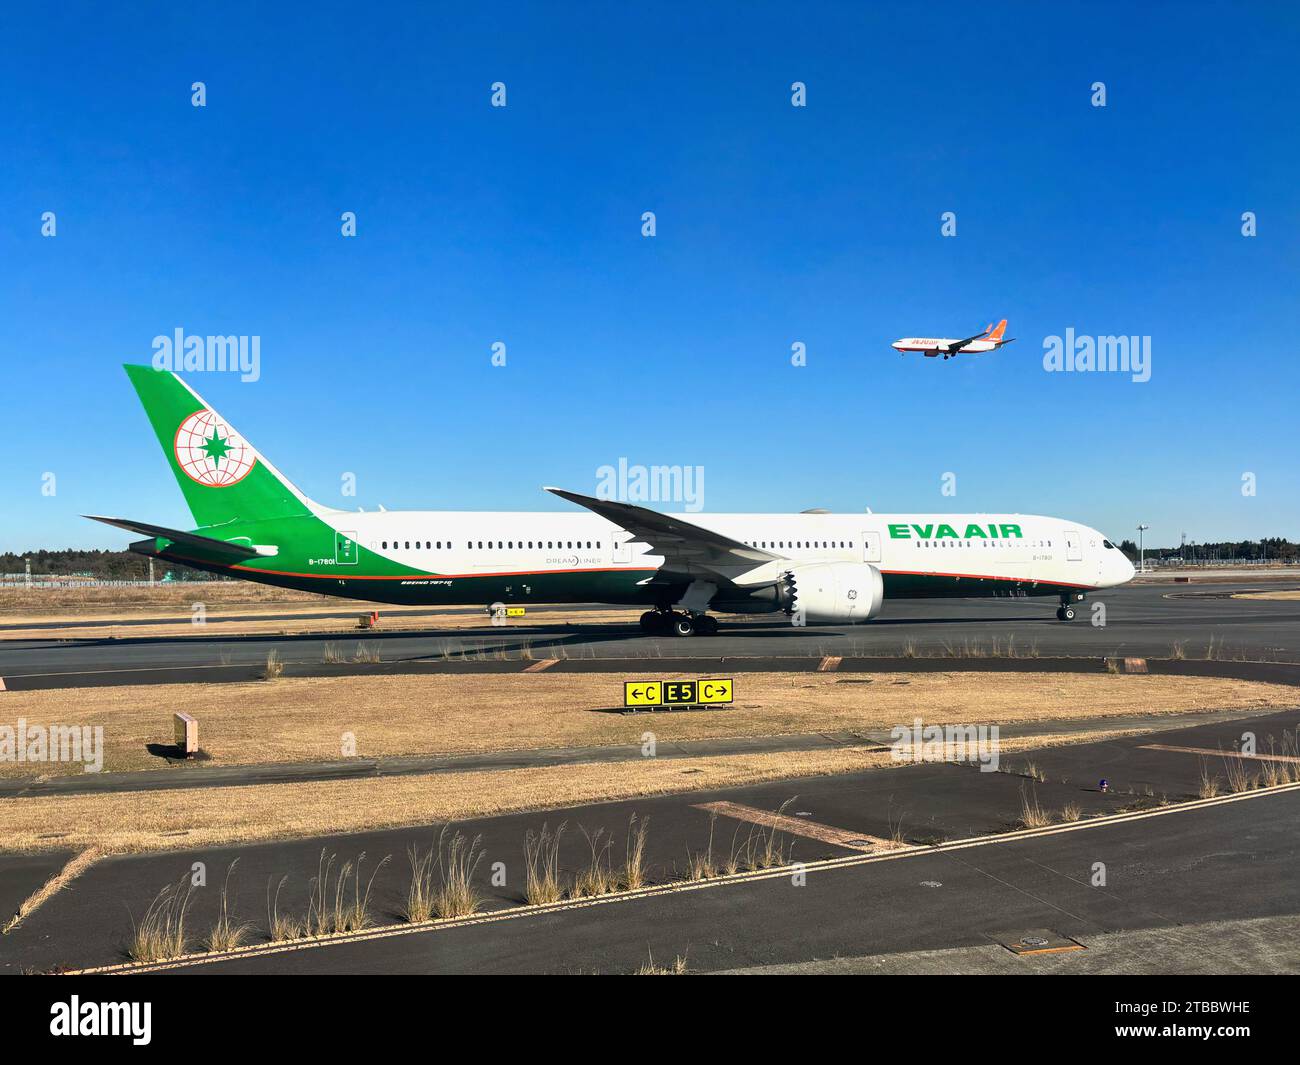 A EVA Air airplane taxiing on the runway at Tokyo's Narita International Airport. An arriving airplane can be seen in the background. Stock Photo